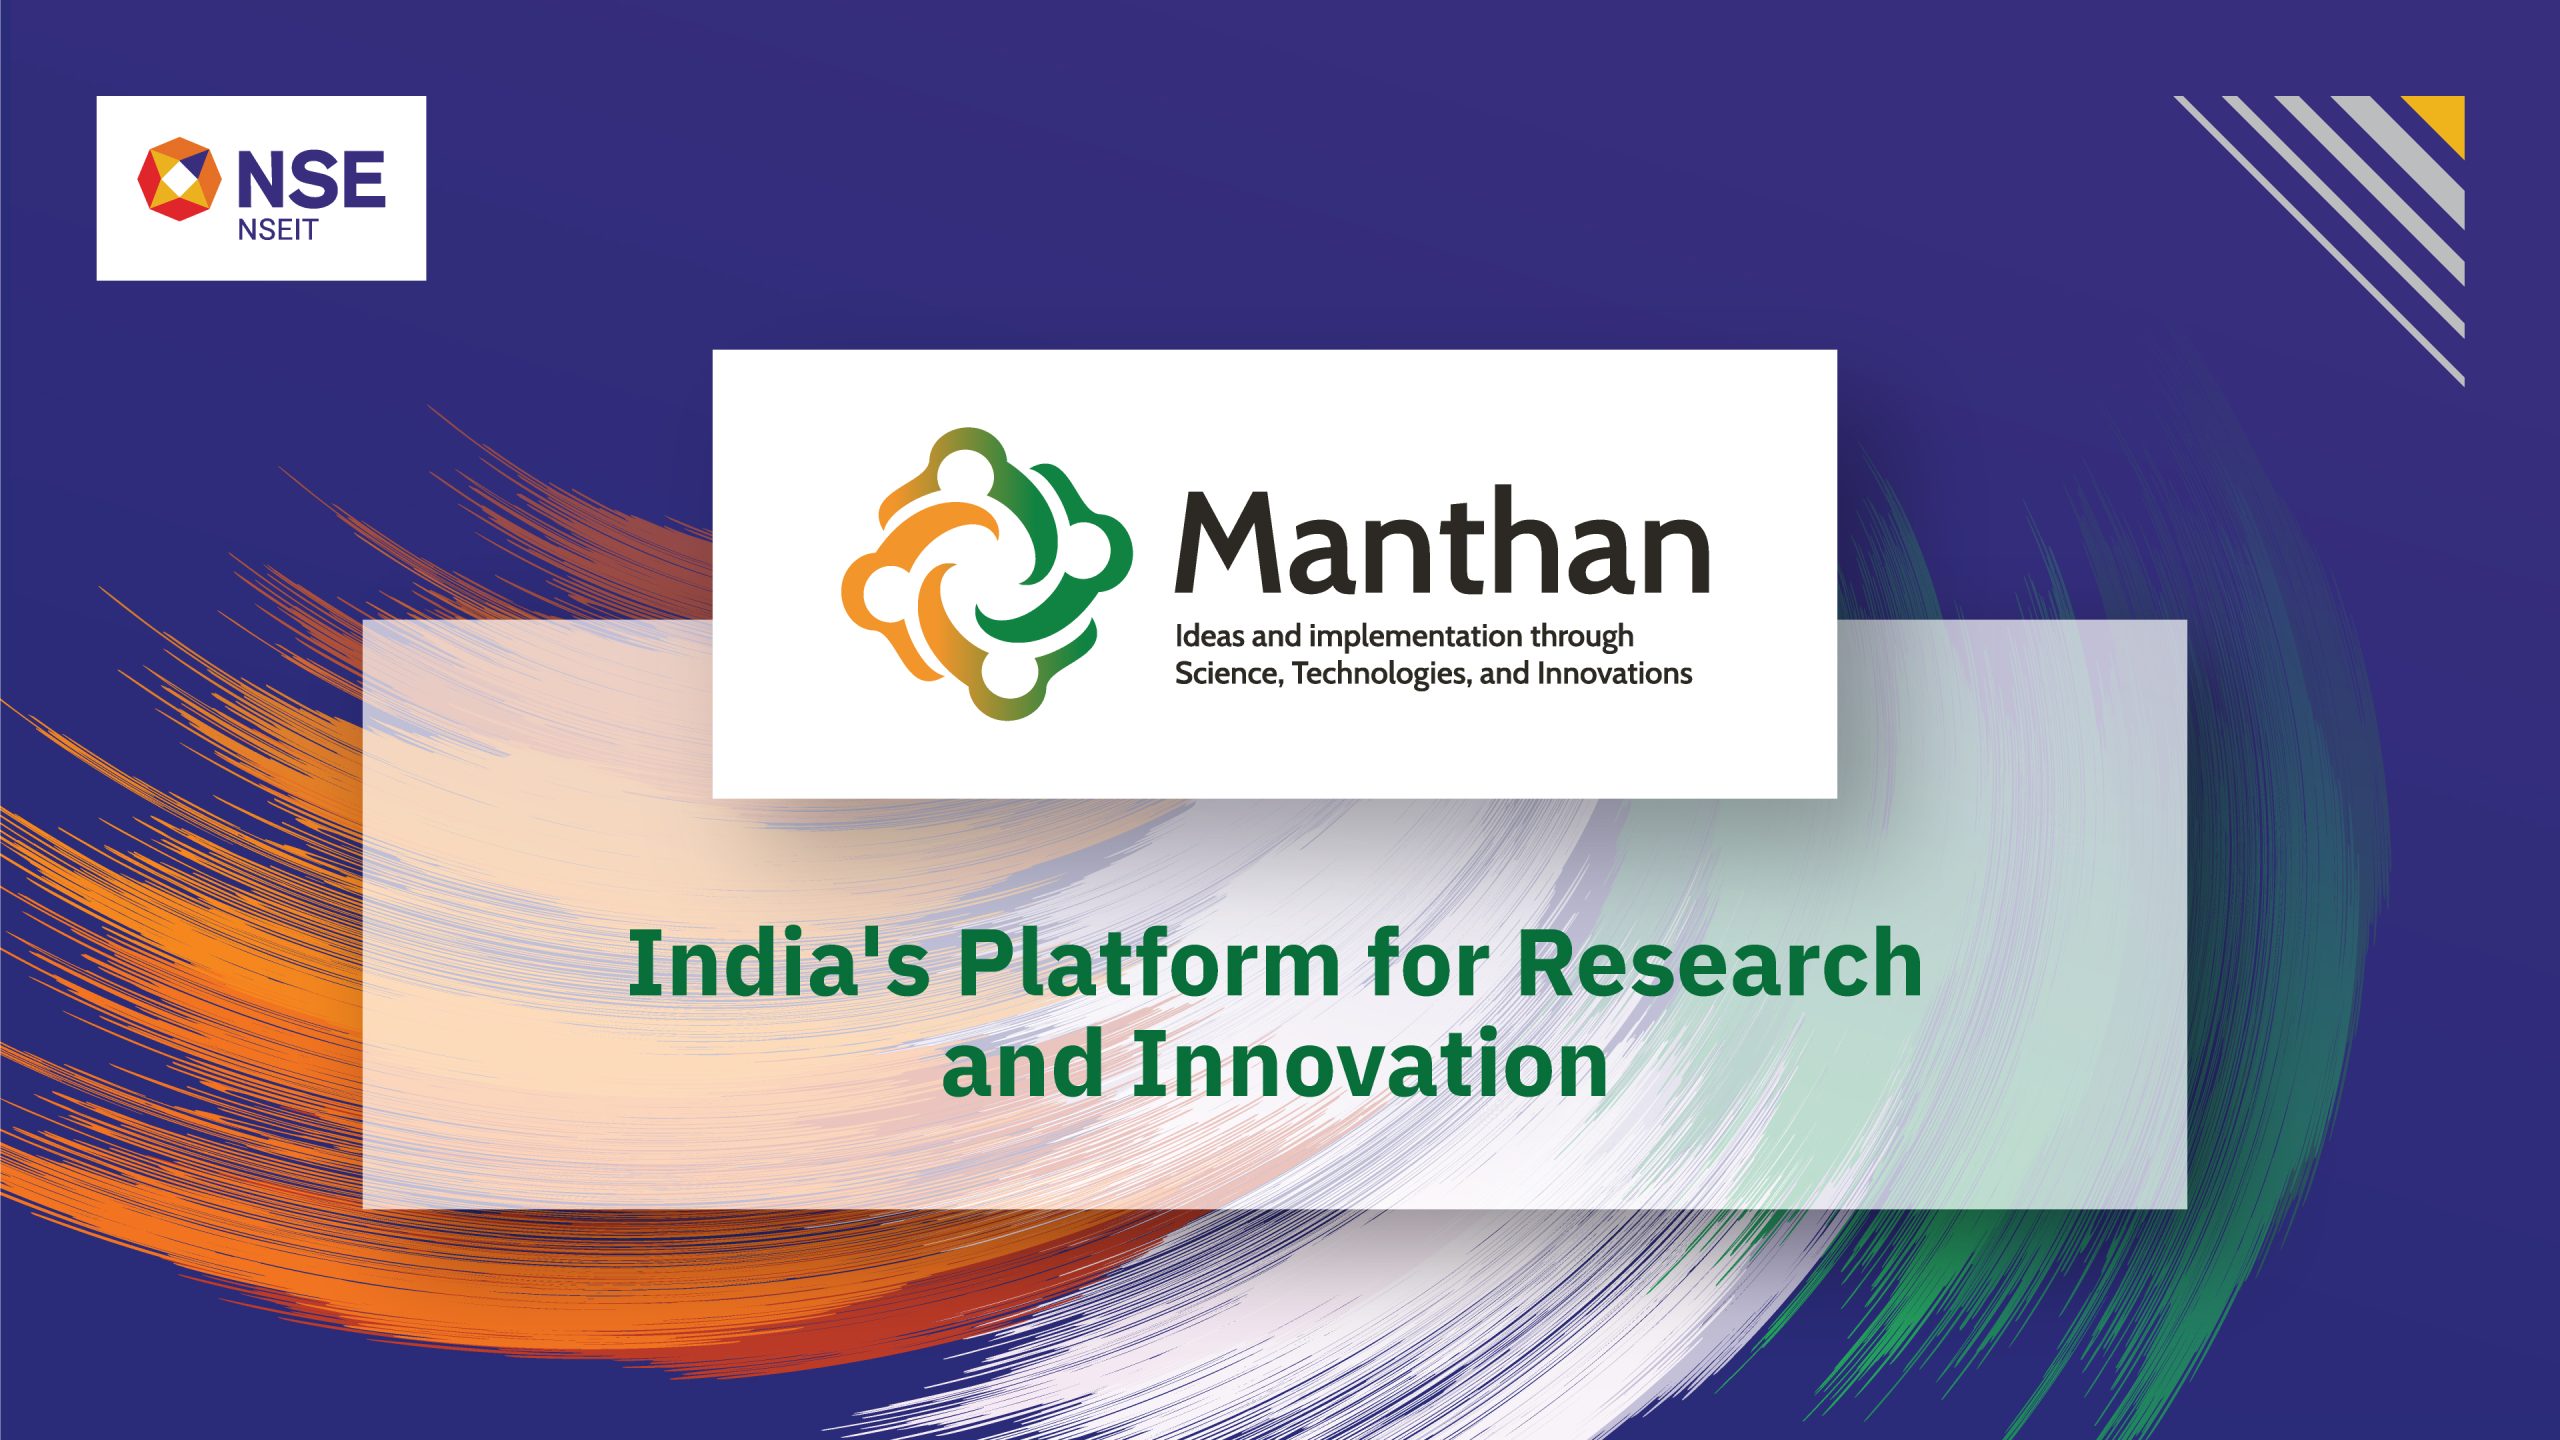 Manthan – India’s Platform for Research & Development | Powered by NSEIT